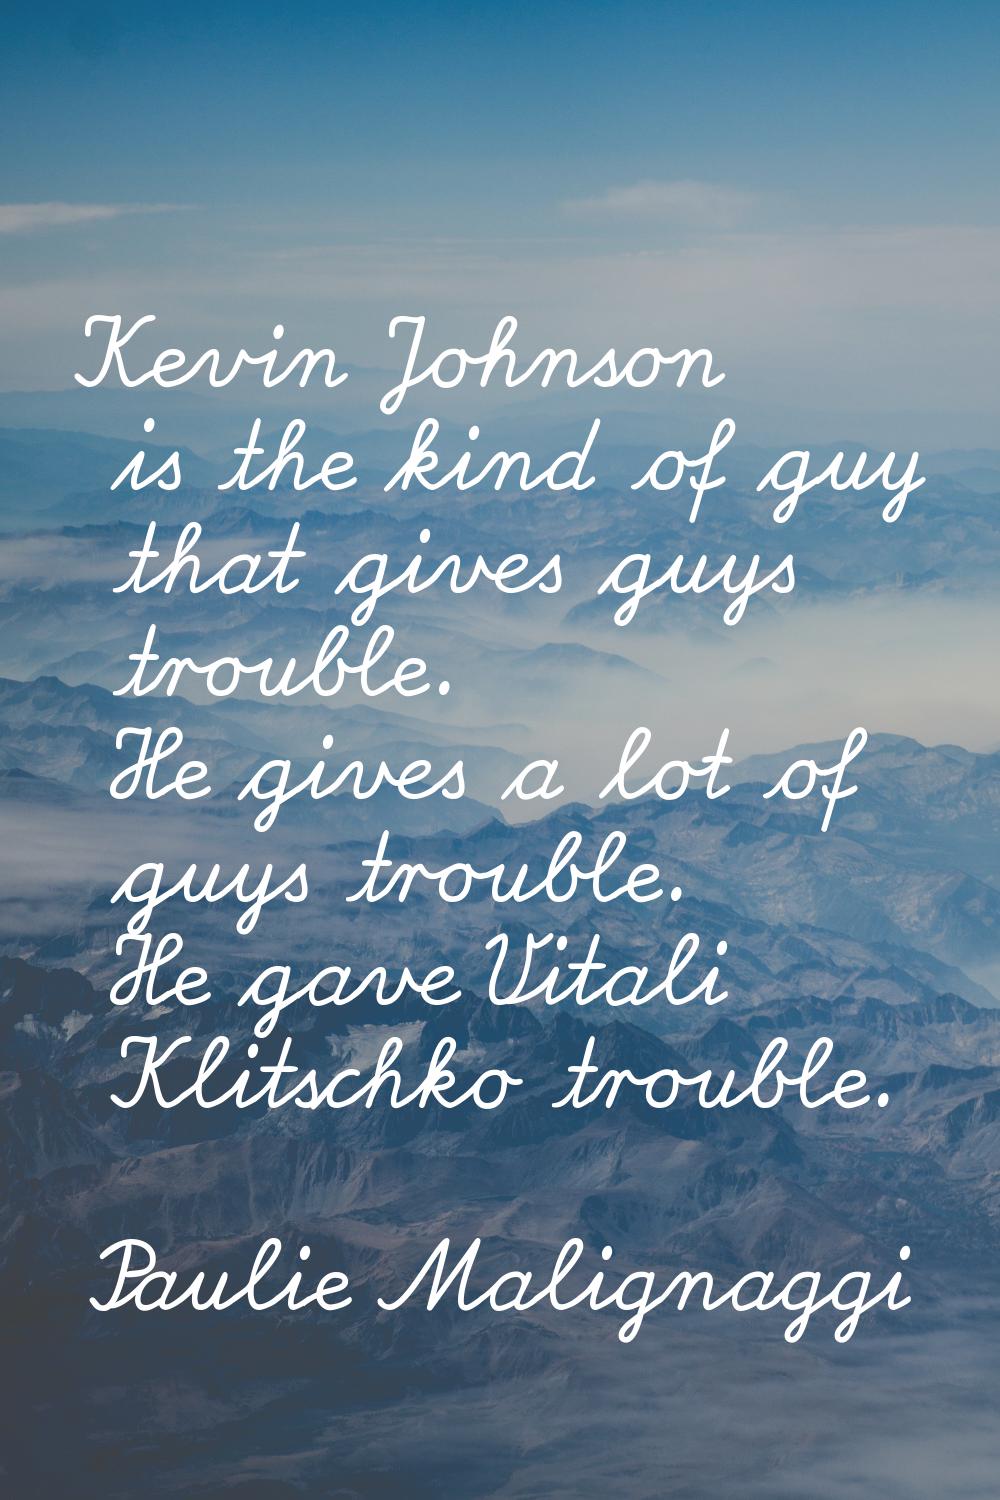 Kevin Johnson is the kind of guy that gives guys trouble. He gives a lot of guys trouble. He gave V